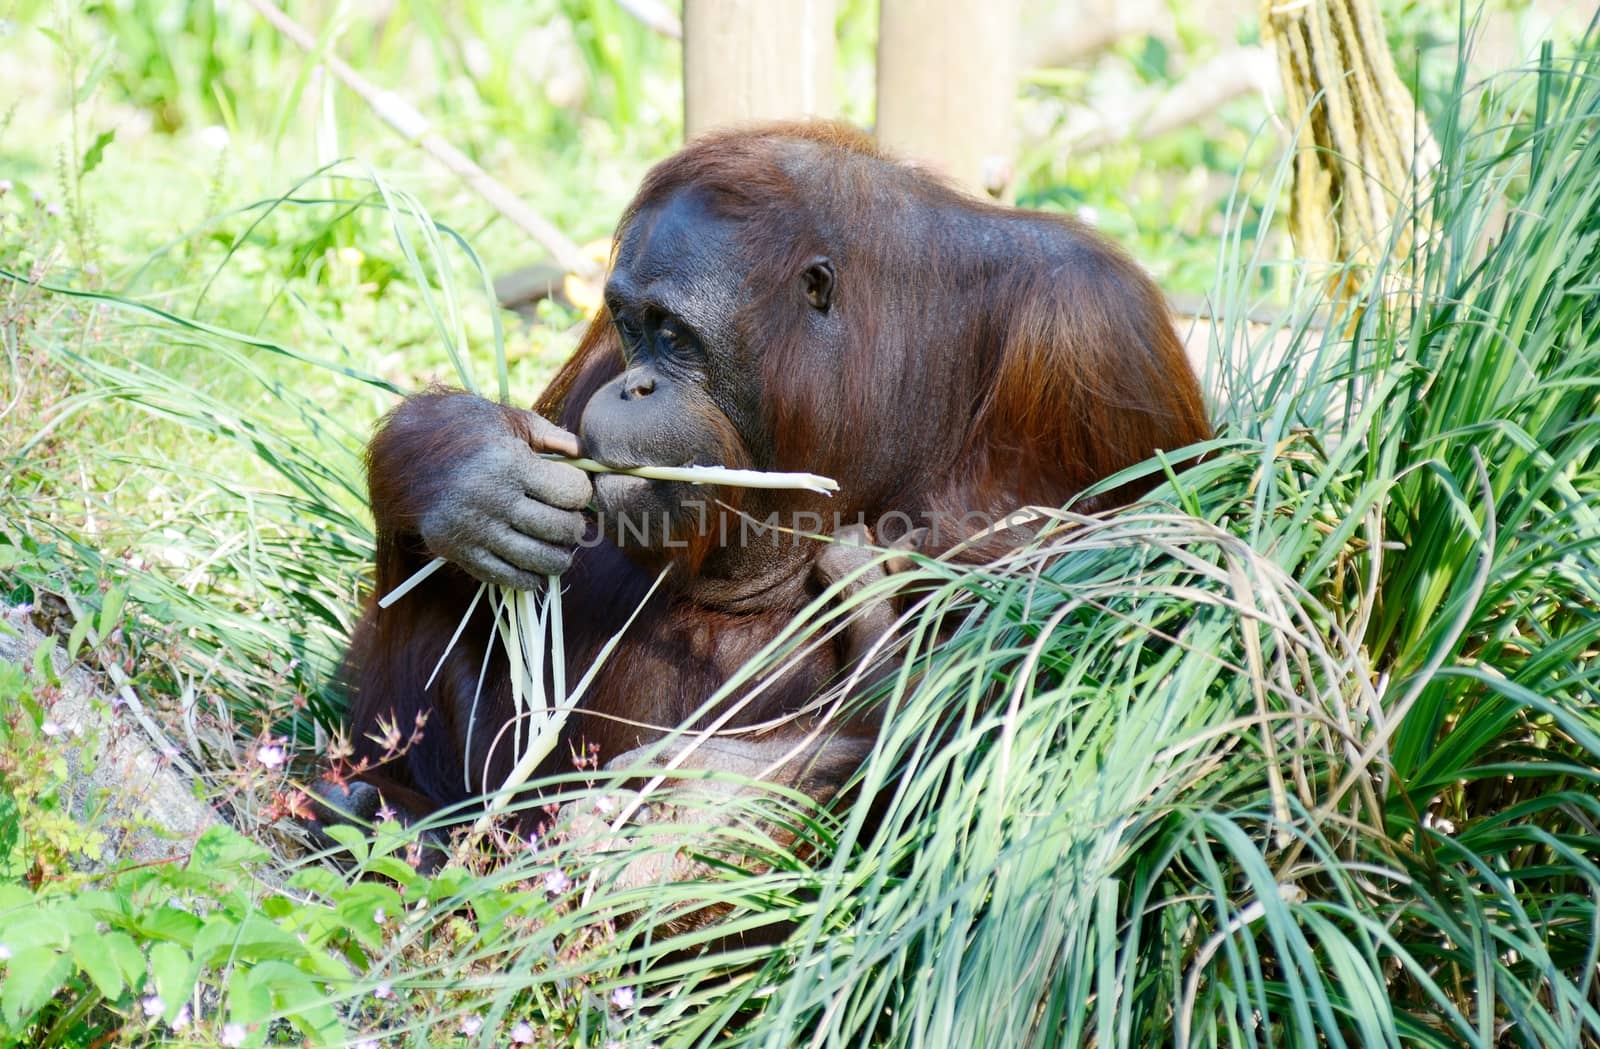 Orangutan mother holding baby and eating while sitting looking happy and relaxed